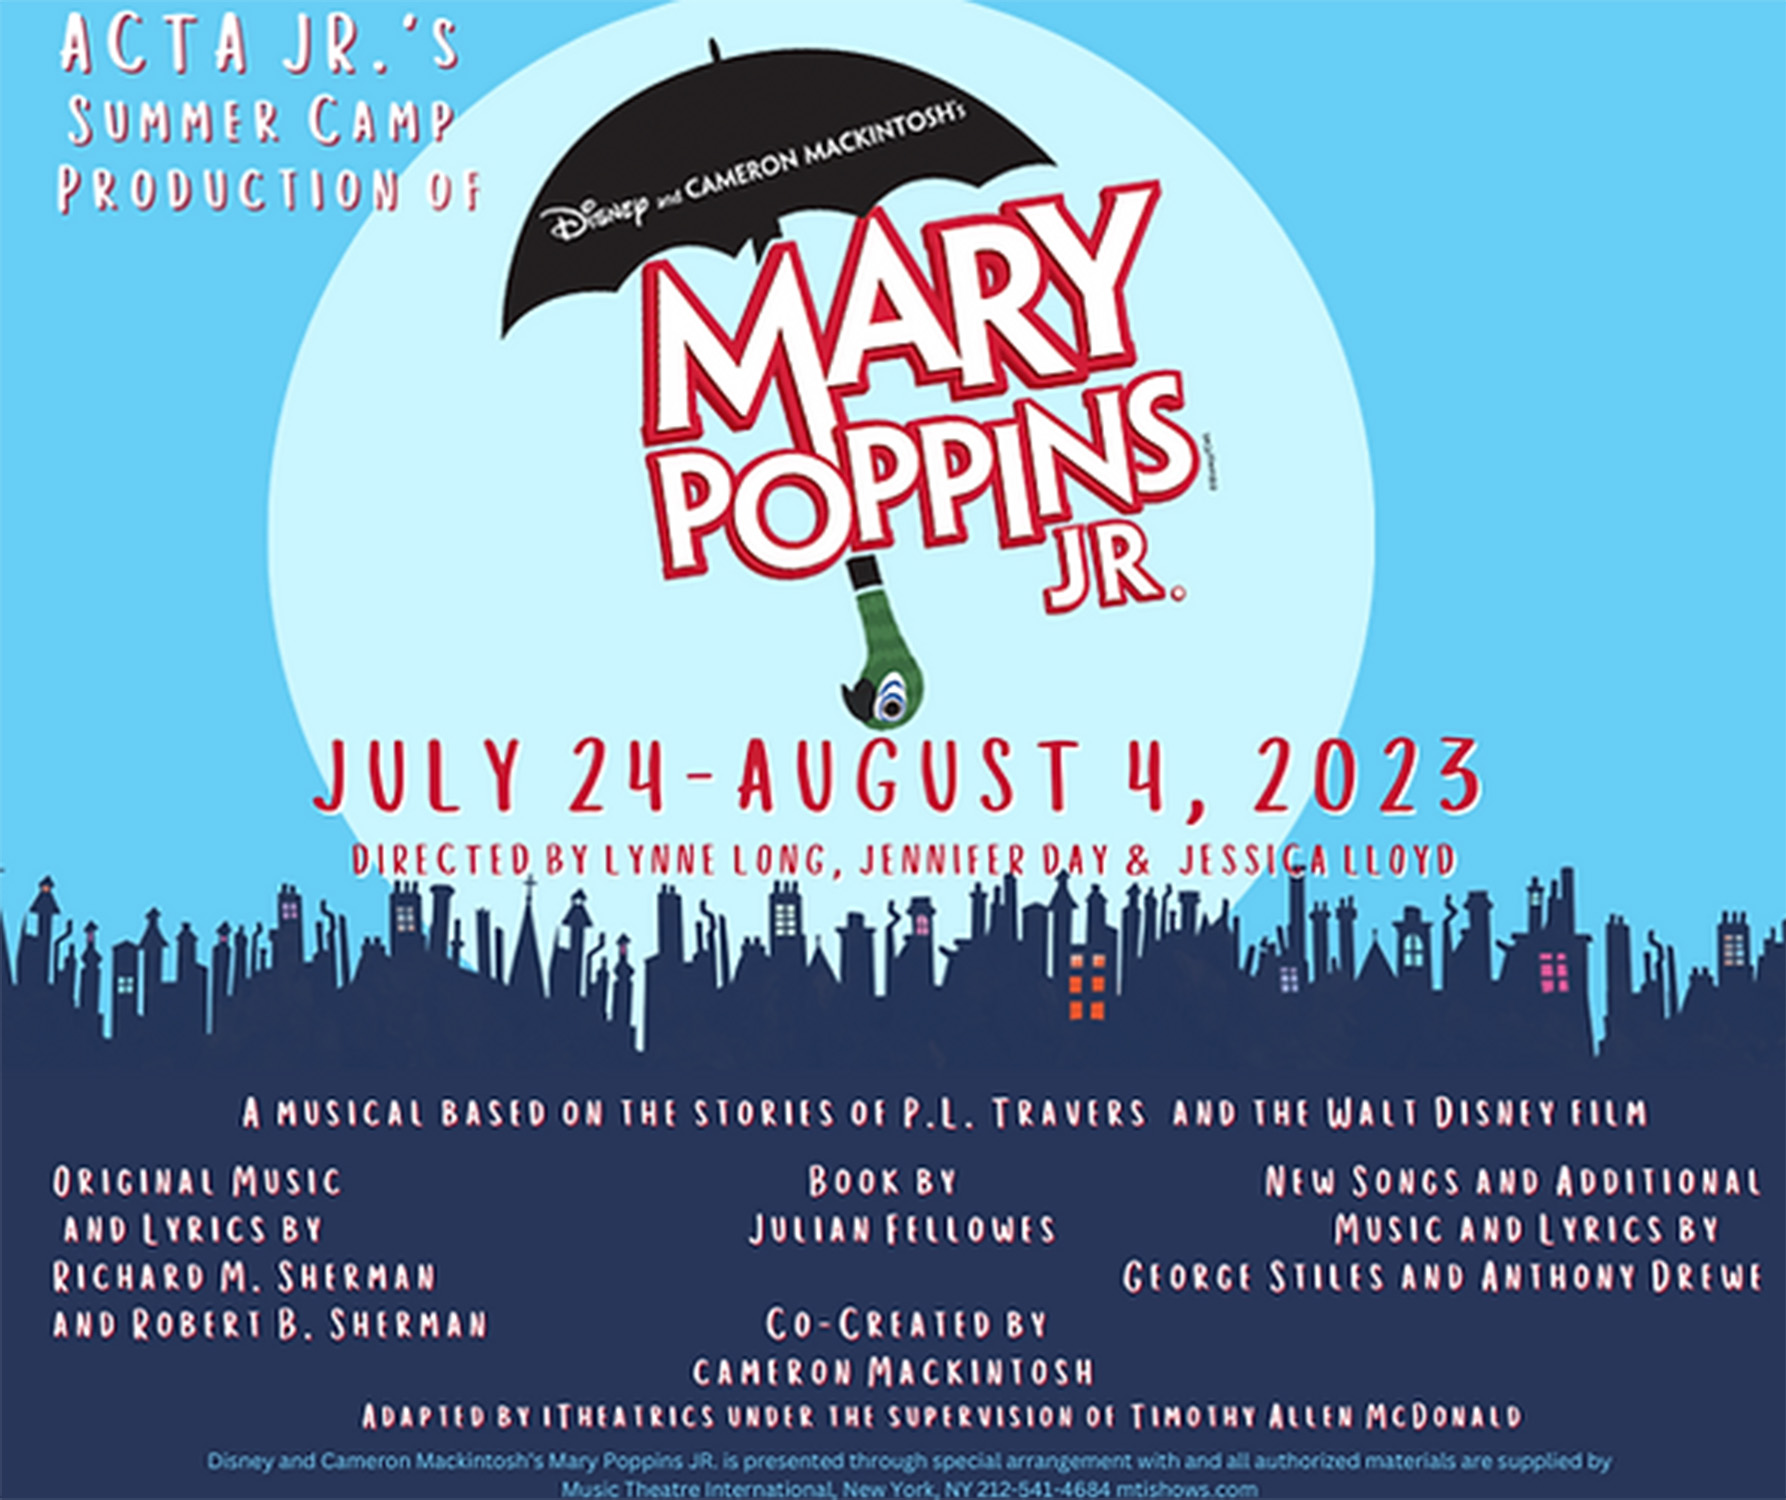 ACTA Jr. theater campers close out the summer with ‘Mary Poppins Jr.’ this weekend